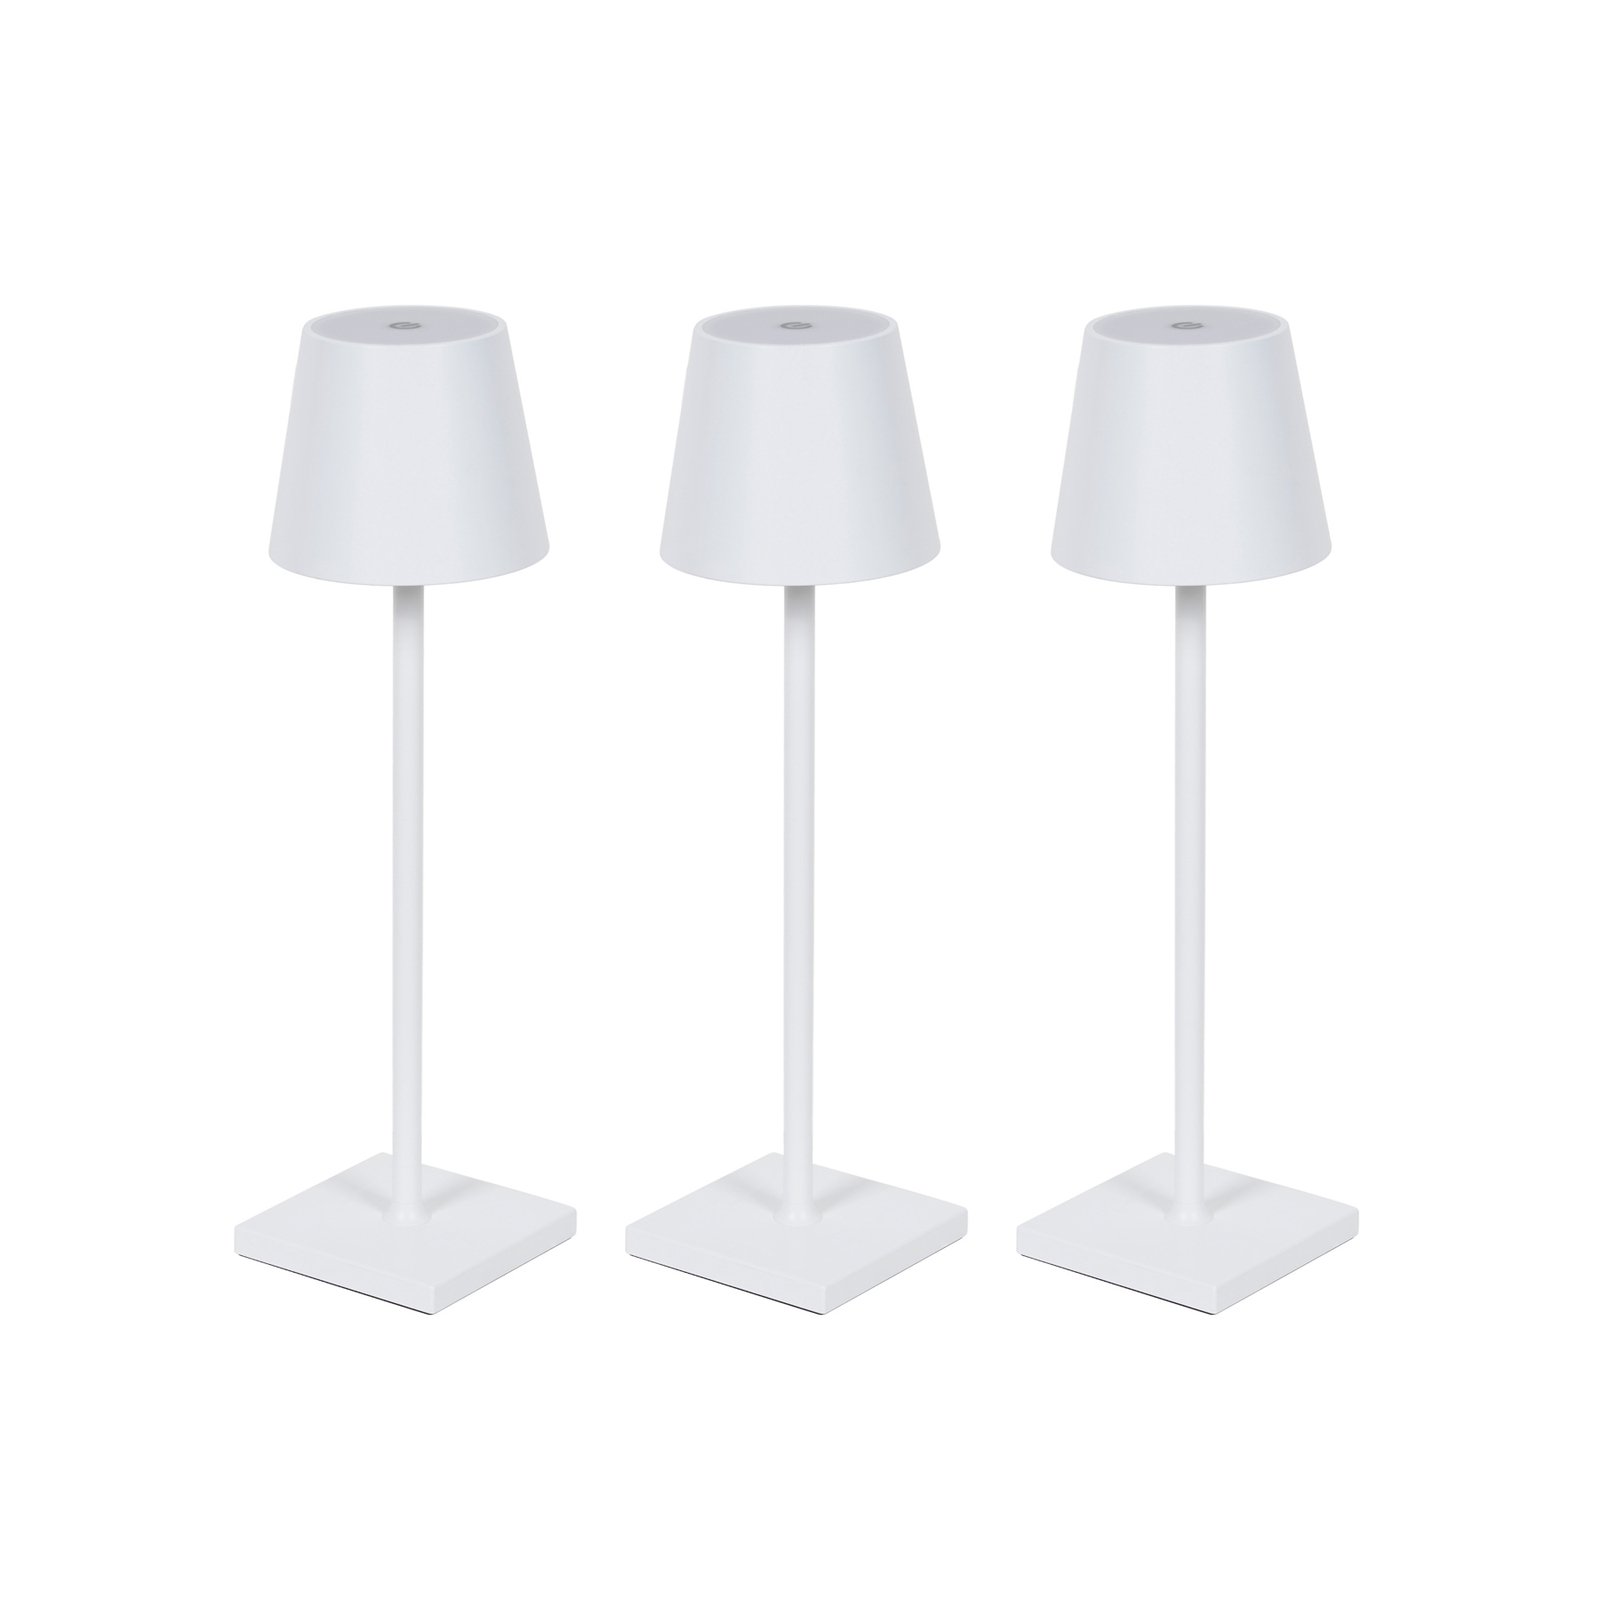 Lindby Janea lampe table batterie LED blanche x3